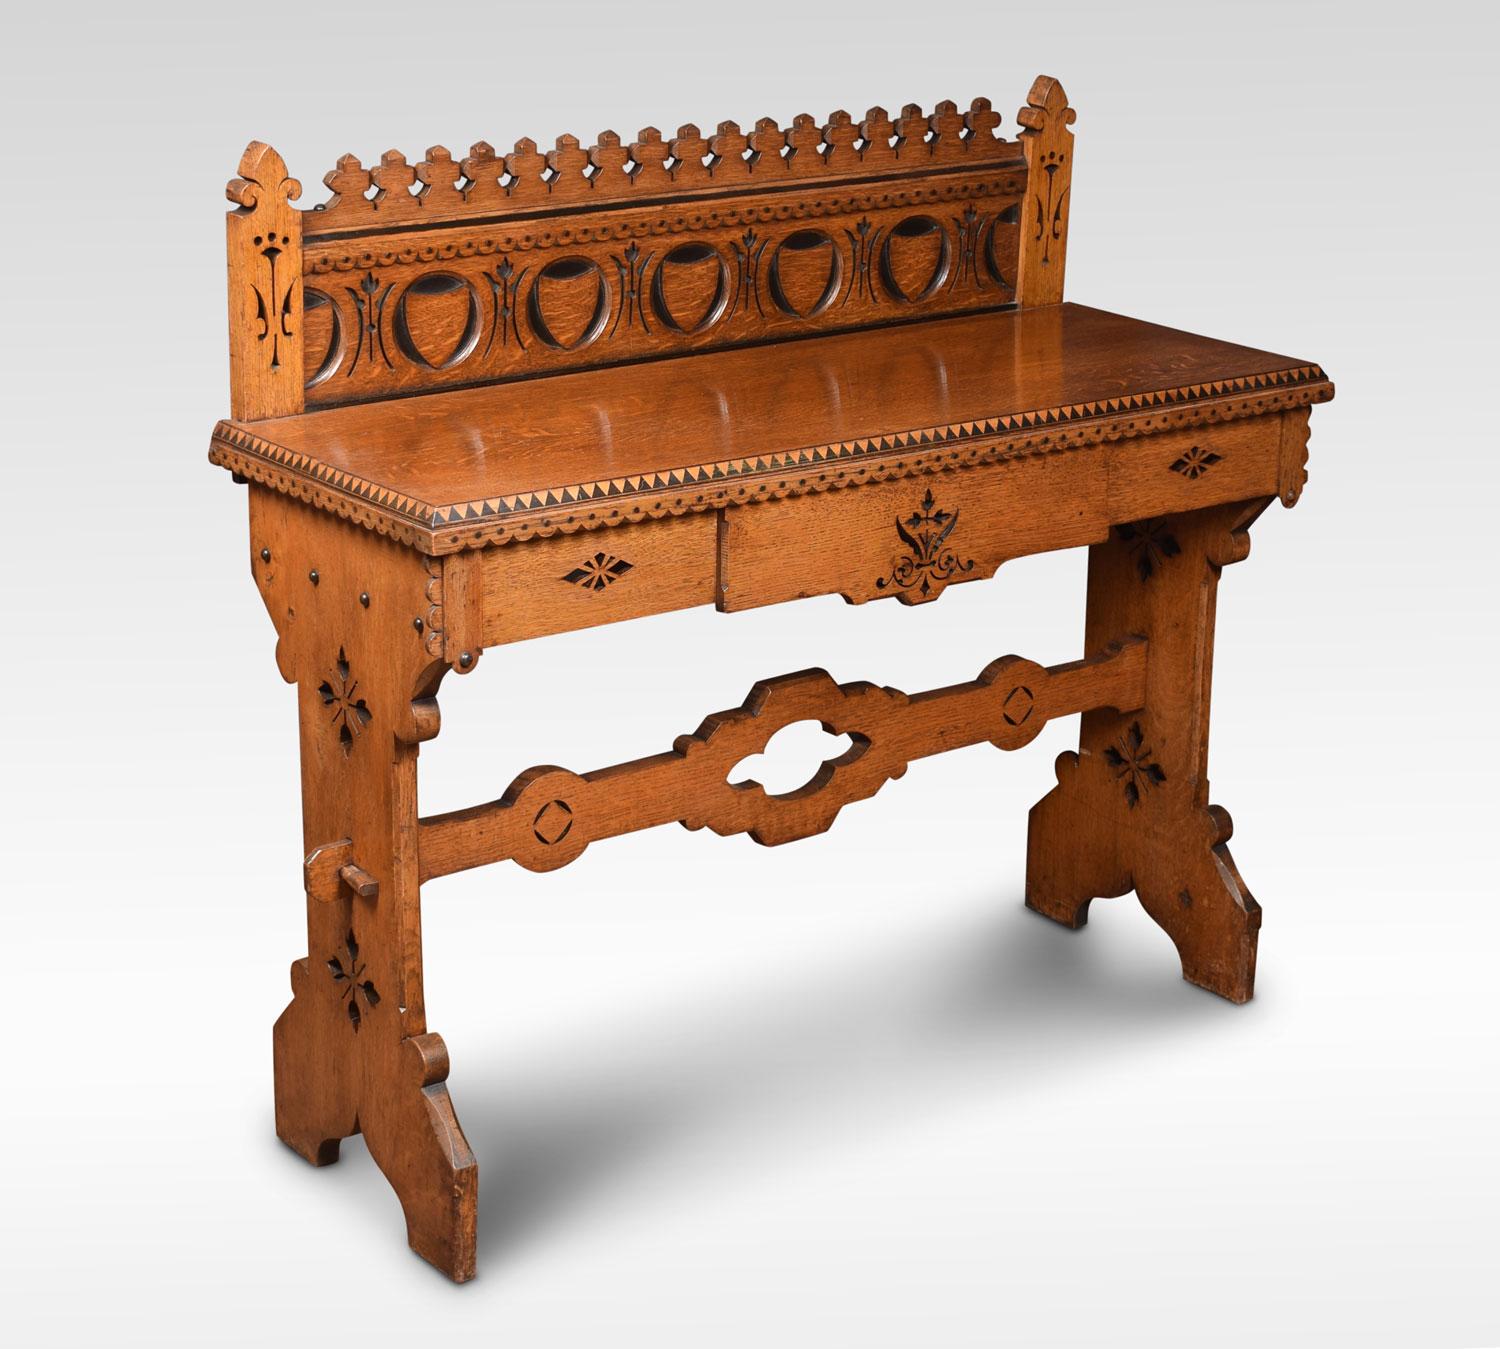 British Victorian Gothic Revival Hall Table in the Manner of Charles Bevan